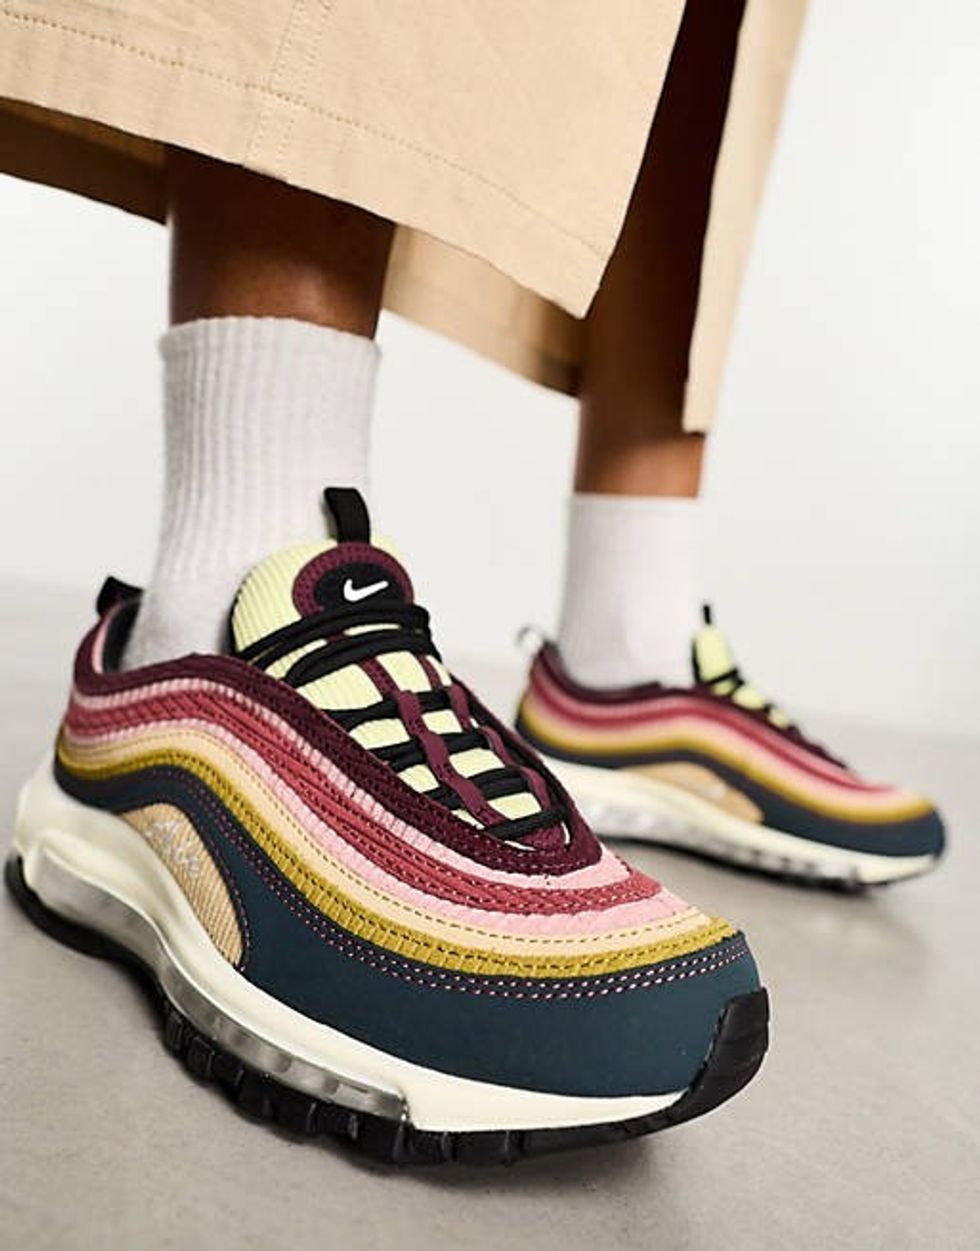 Nike Air Max 97 sneakers in cord mix